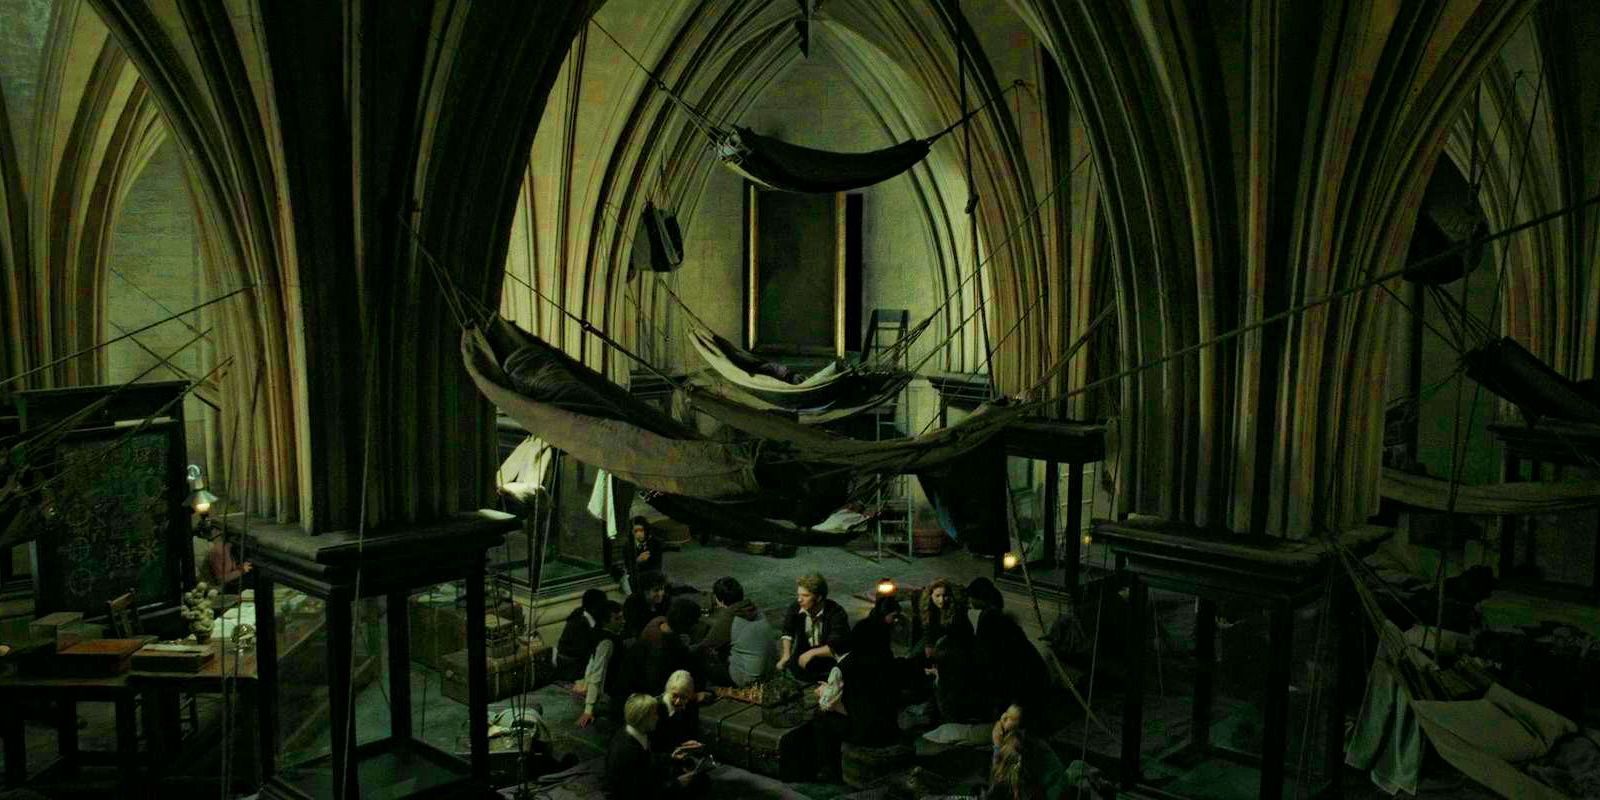 Harry Potter 8 Facts About the Chamber of Secrets the Movie Leaves Out